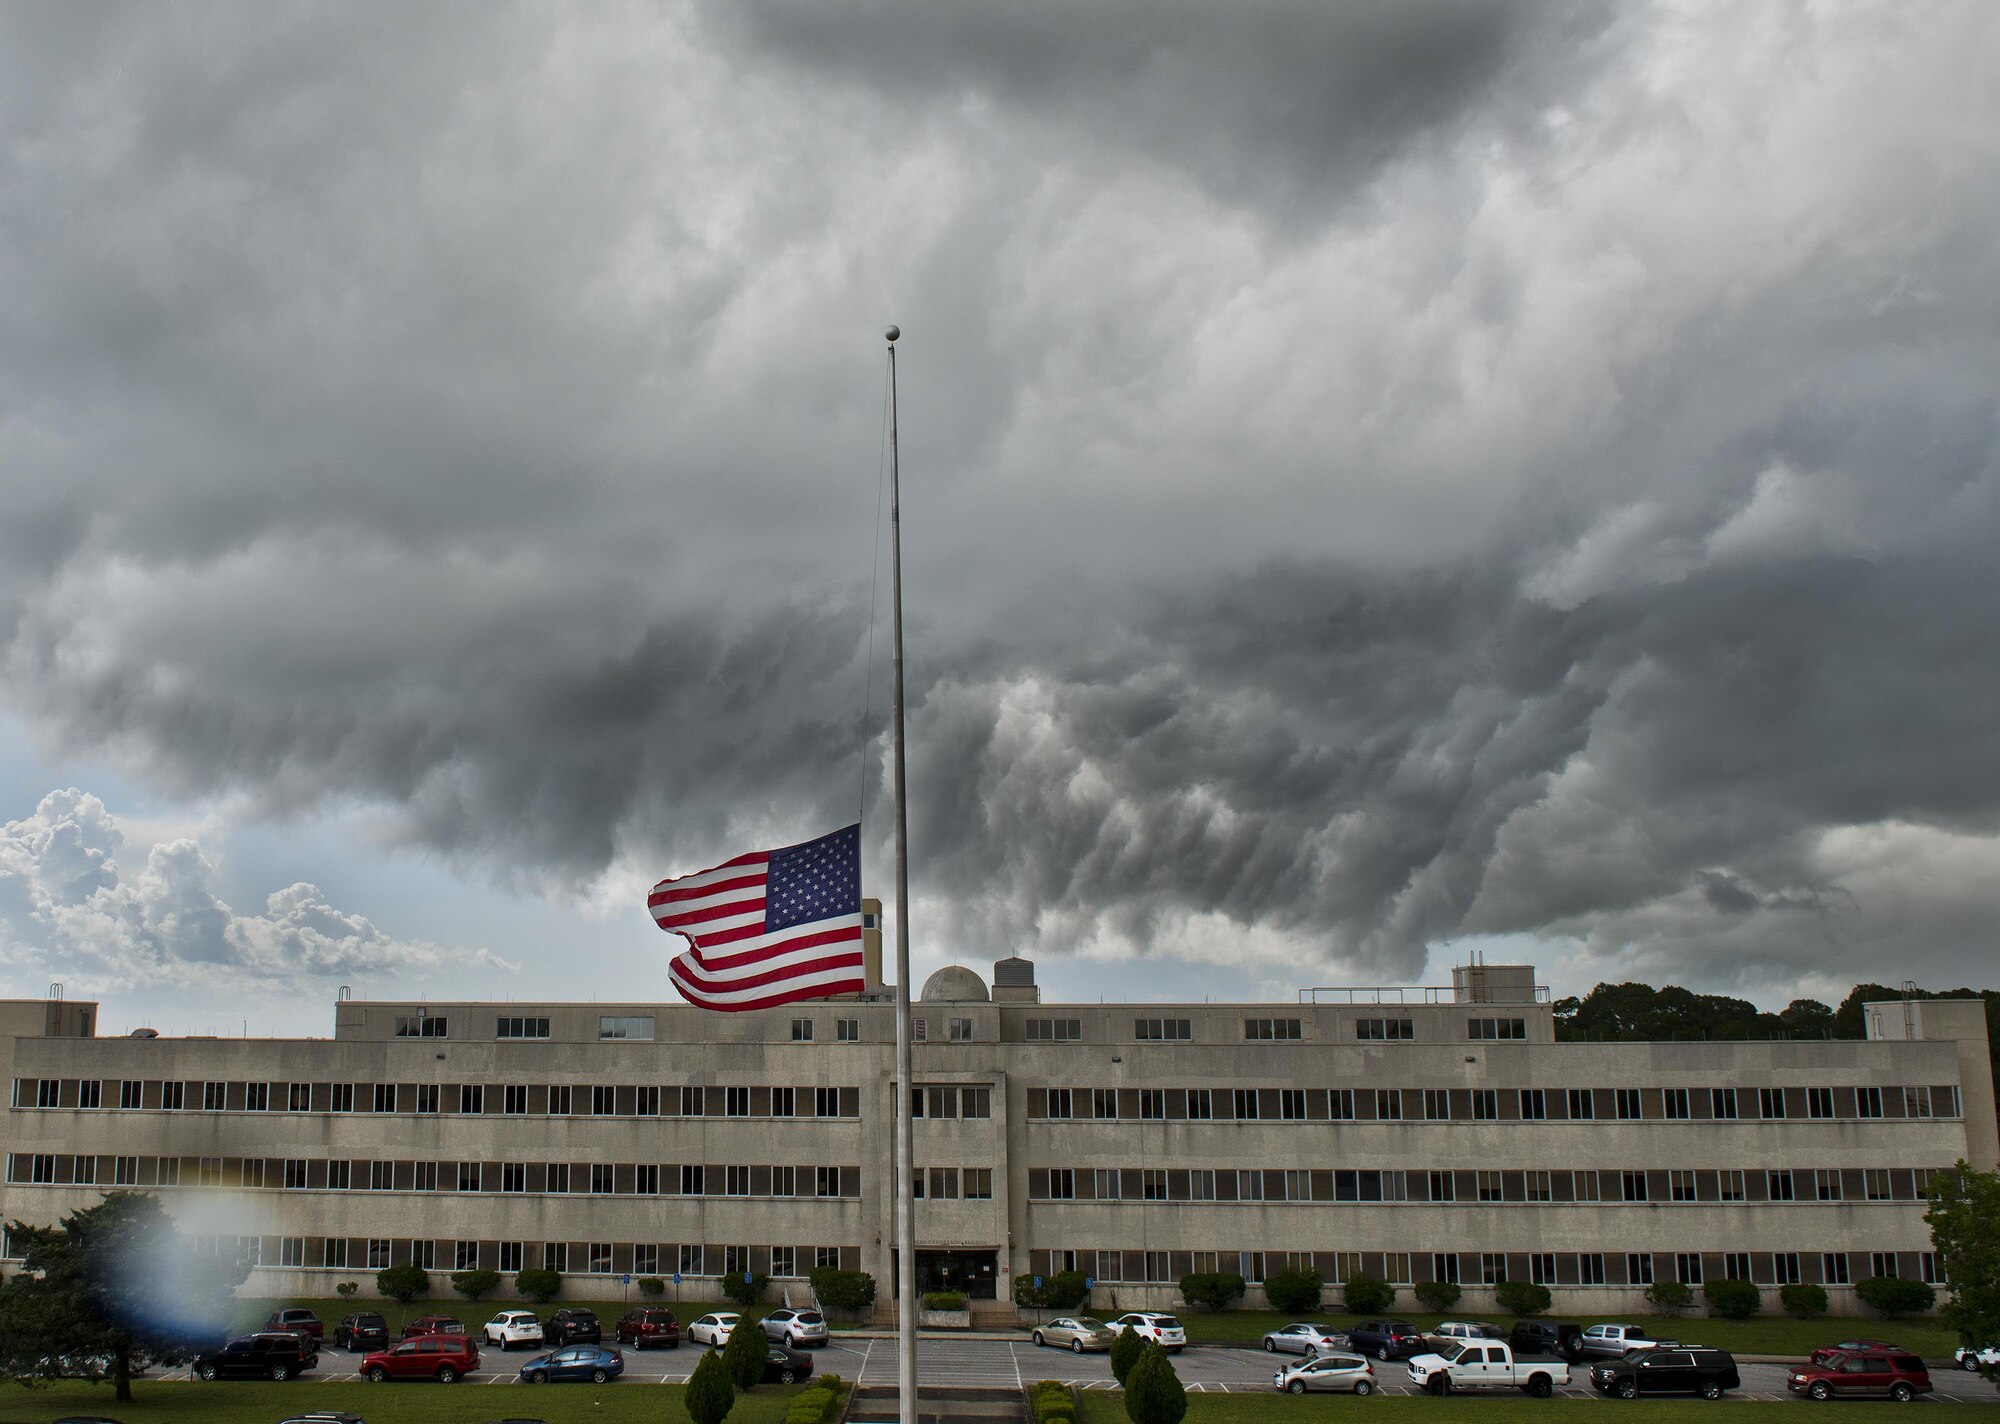 A dark storm cloud moves toward the 96th Test Wing headquarters building the morning of July 12 at Eglin Air Force Base, Fla.  The summer storm brought heavy rain, wind and lightning through the area, but was gone in less than an hour.  (U.S. Air Force photo/Samuel King Jr.)